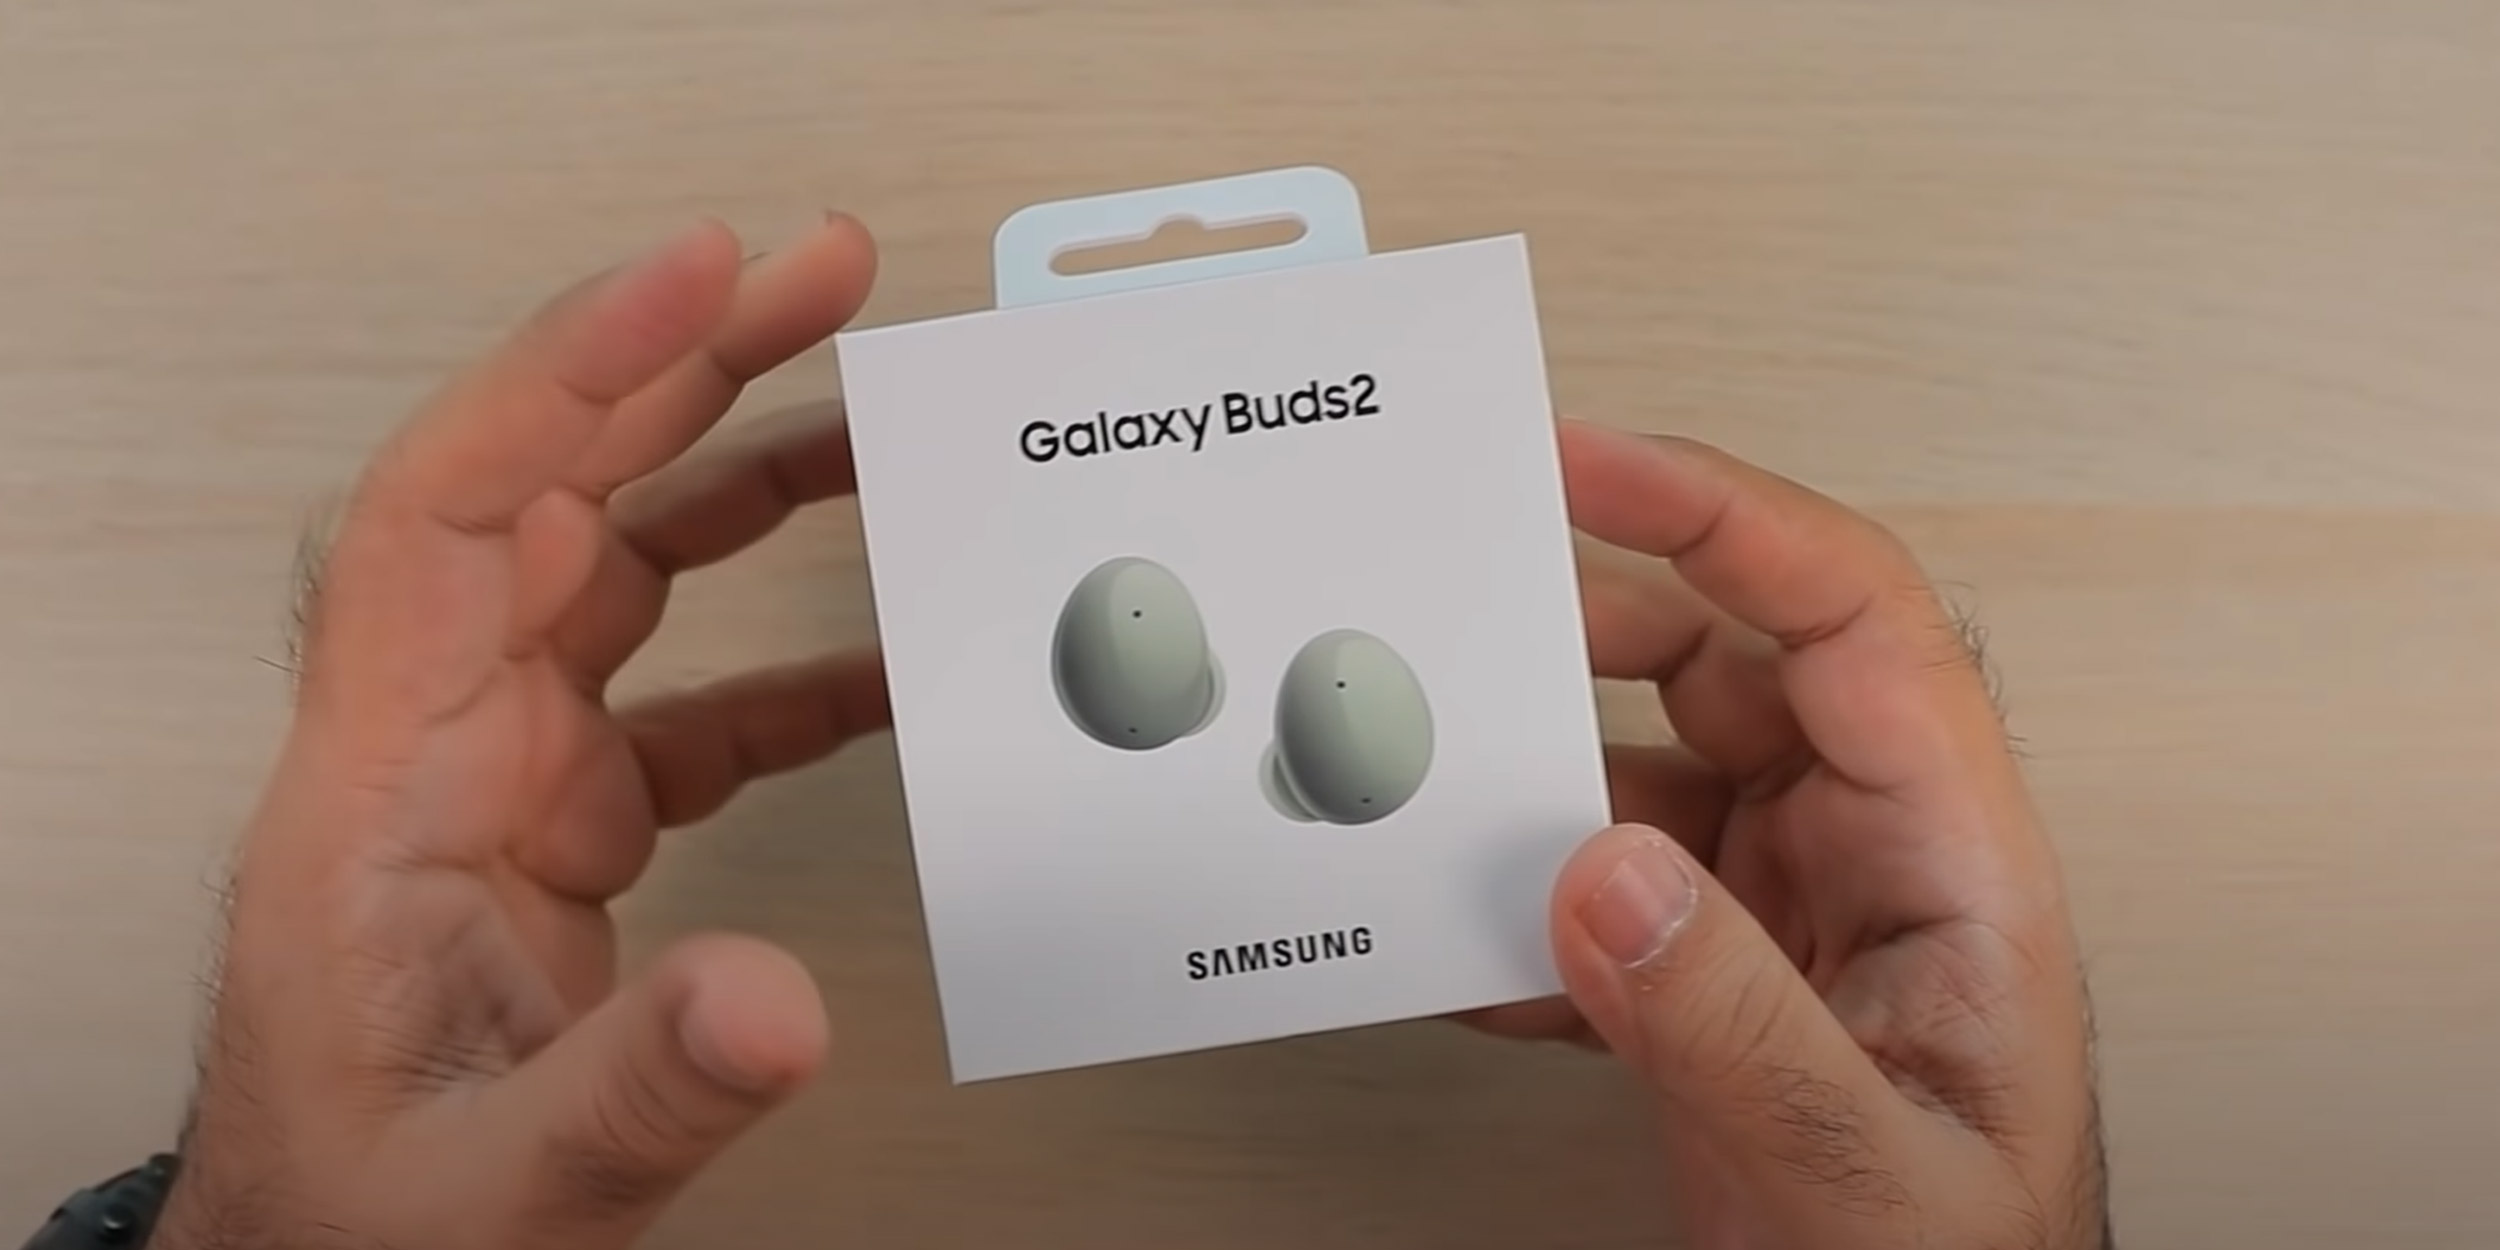 Samsung Galaxy Buds 2 receive early unboxing video - 9to5Google